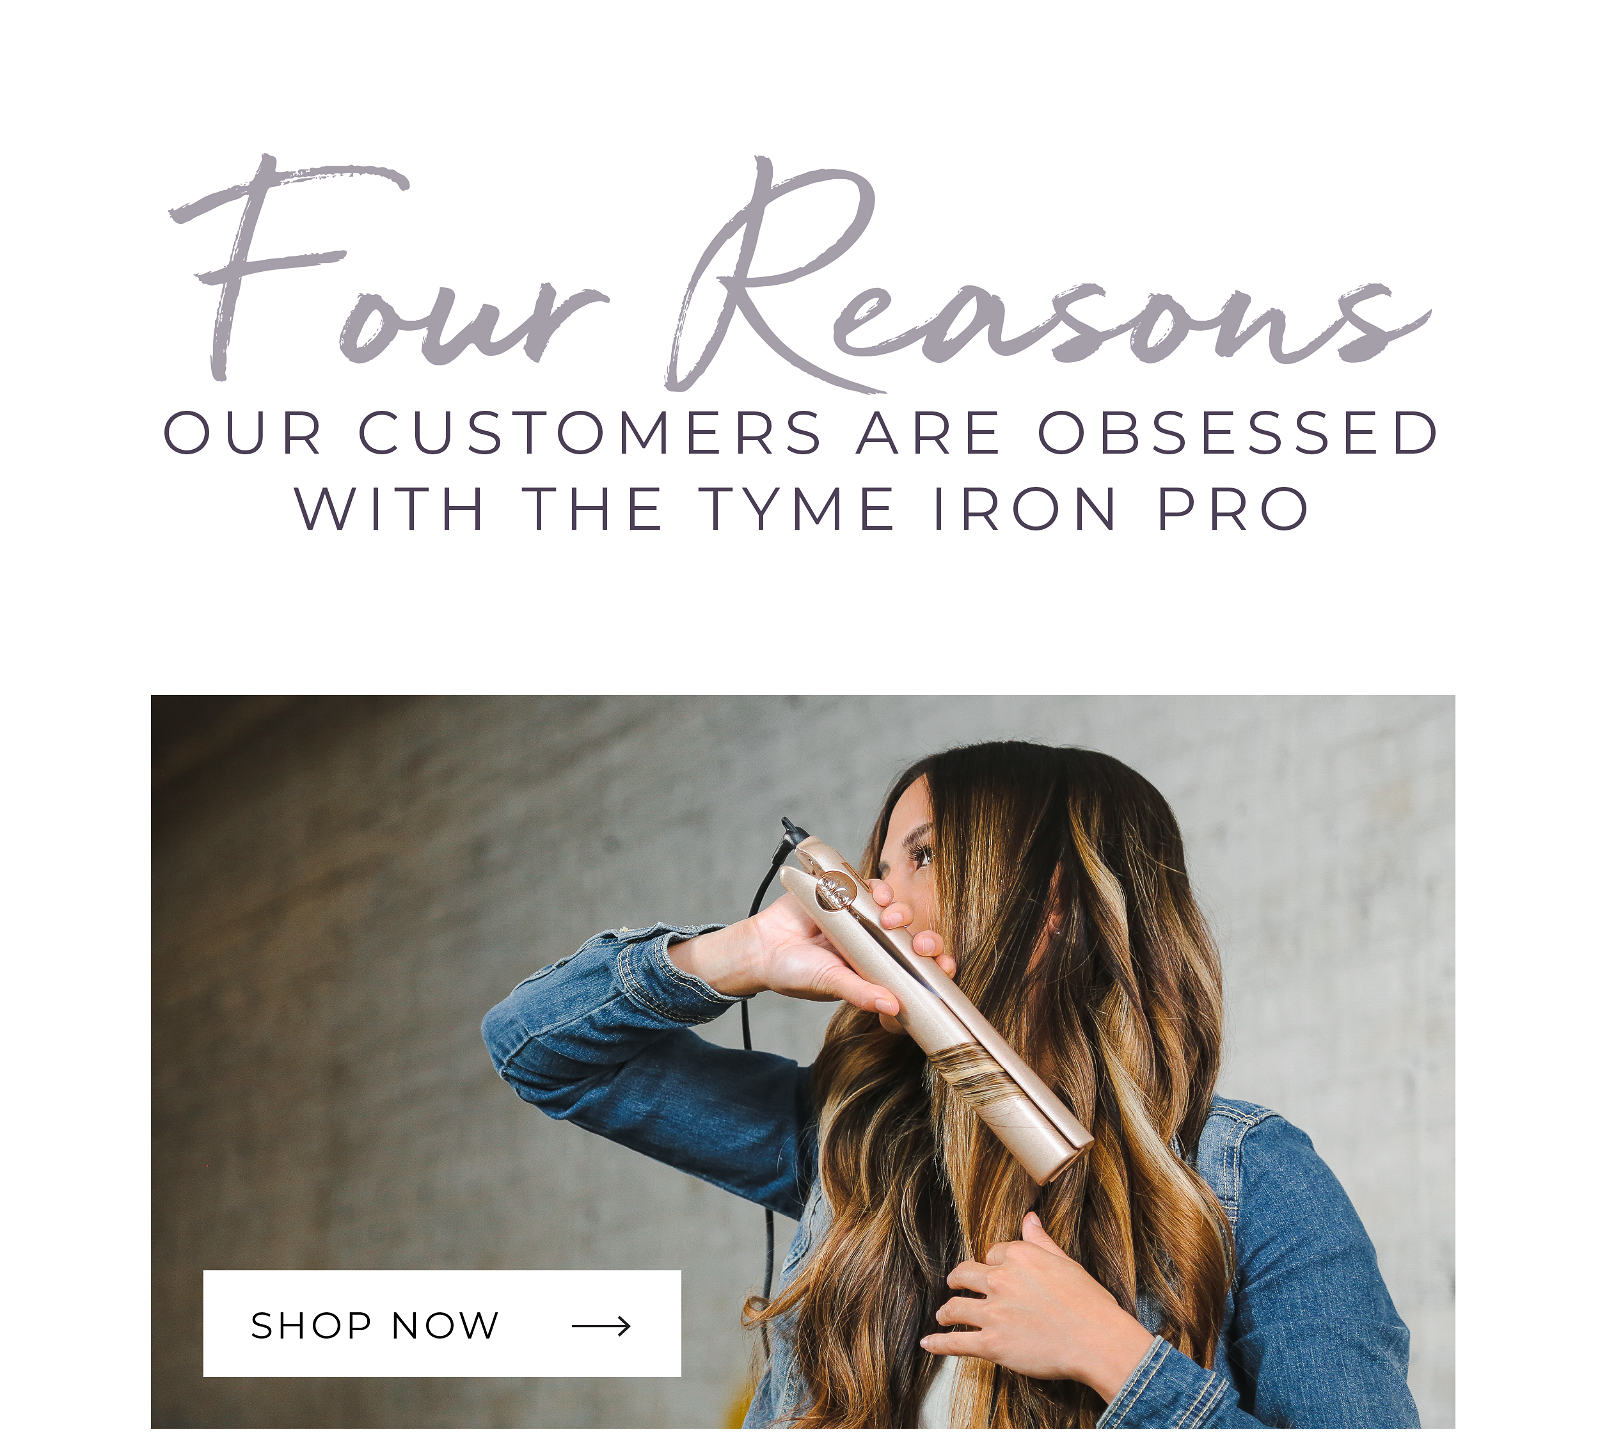 Four reasons our customers are obsessed with the TYME Iron Pro - Shop Now